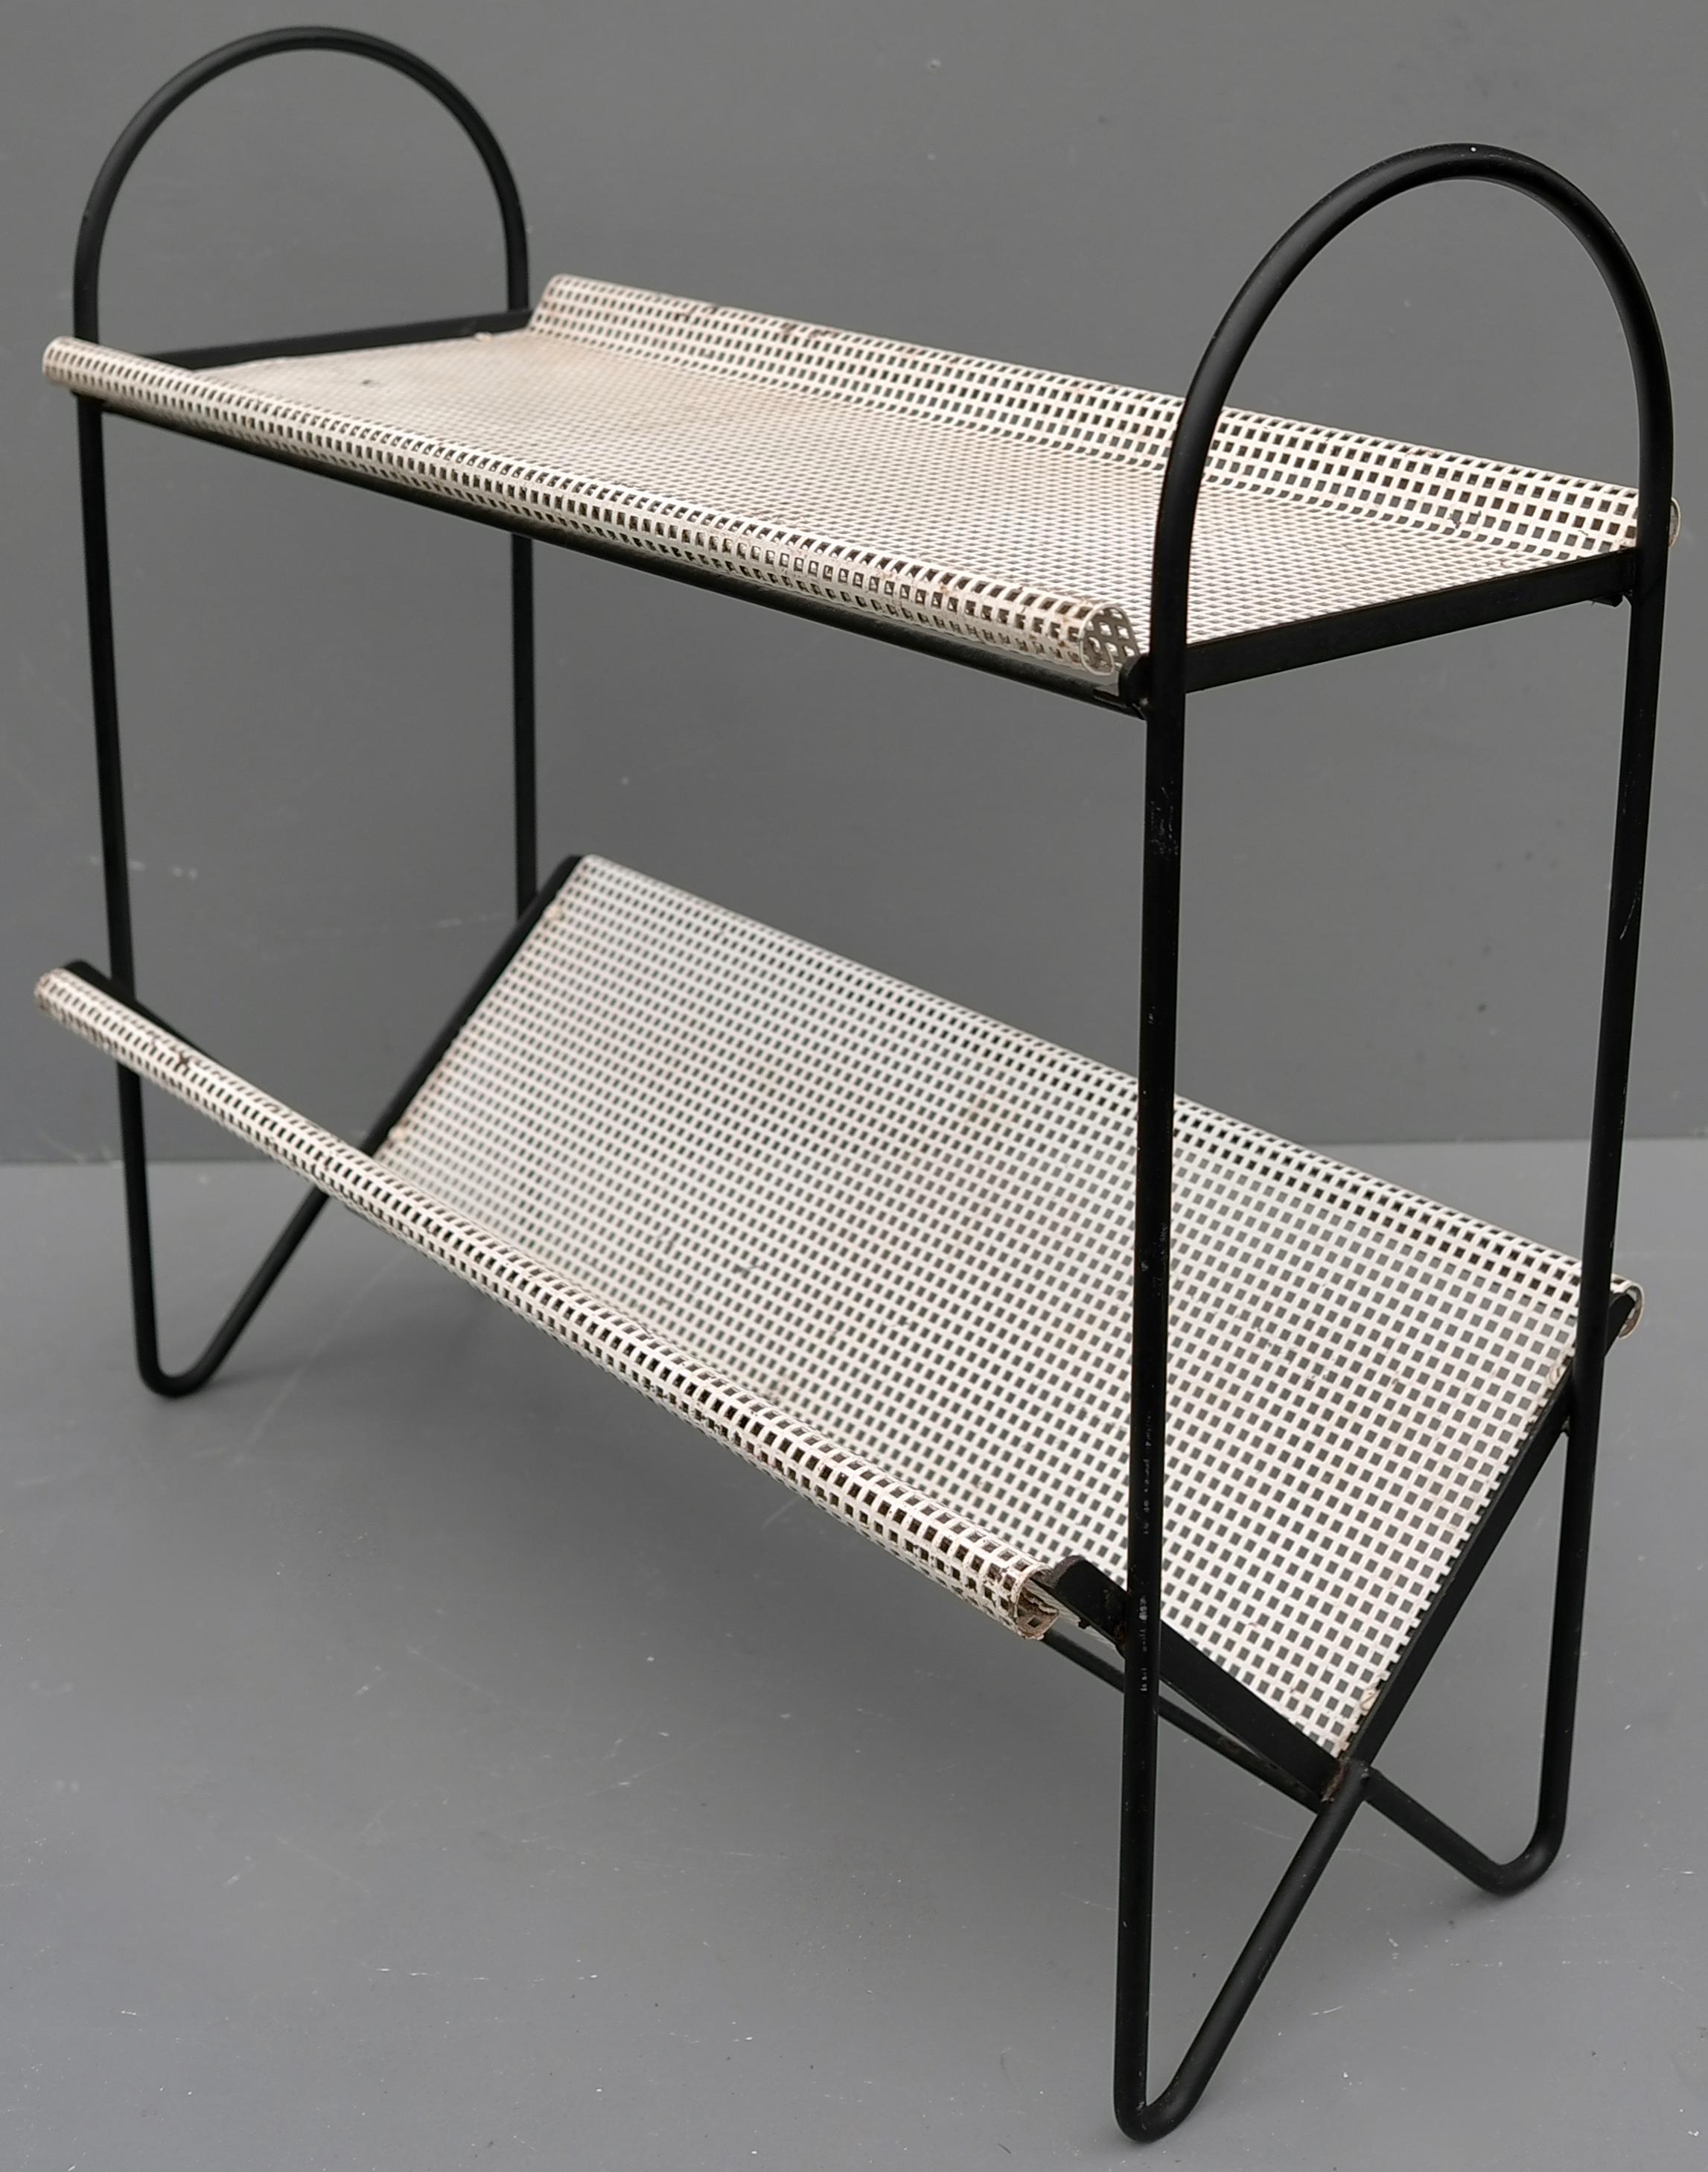 Rare Mathieu Matégot bookstand for Artimeta, 1956. White perforated trays, to use for magazines or books, also useable as a side table. In original vintage condition with the original paint.

This bookstand is shown in the Artimeta catalogue that